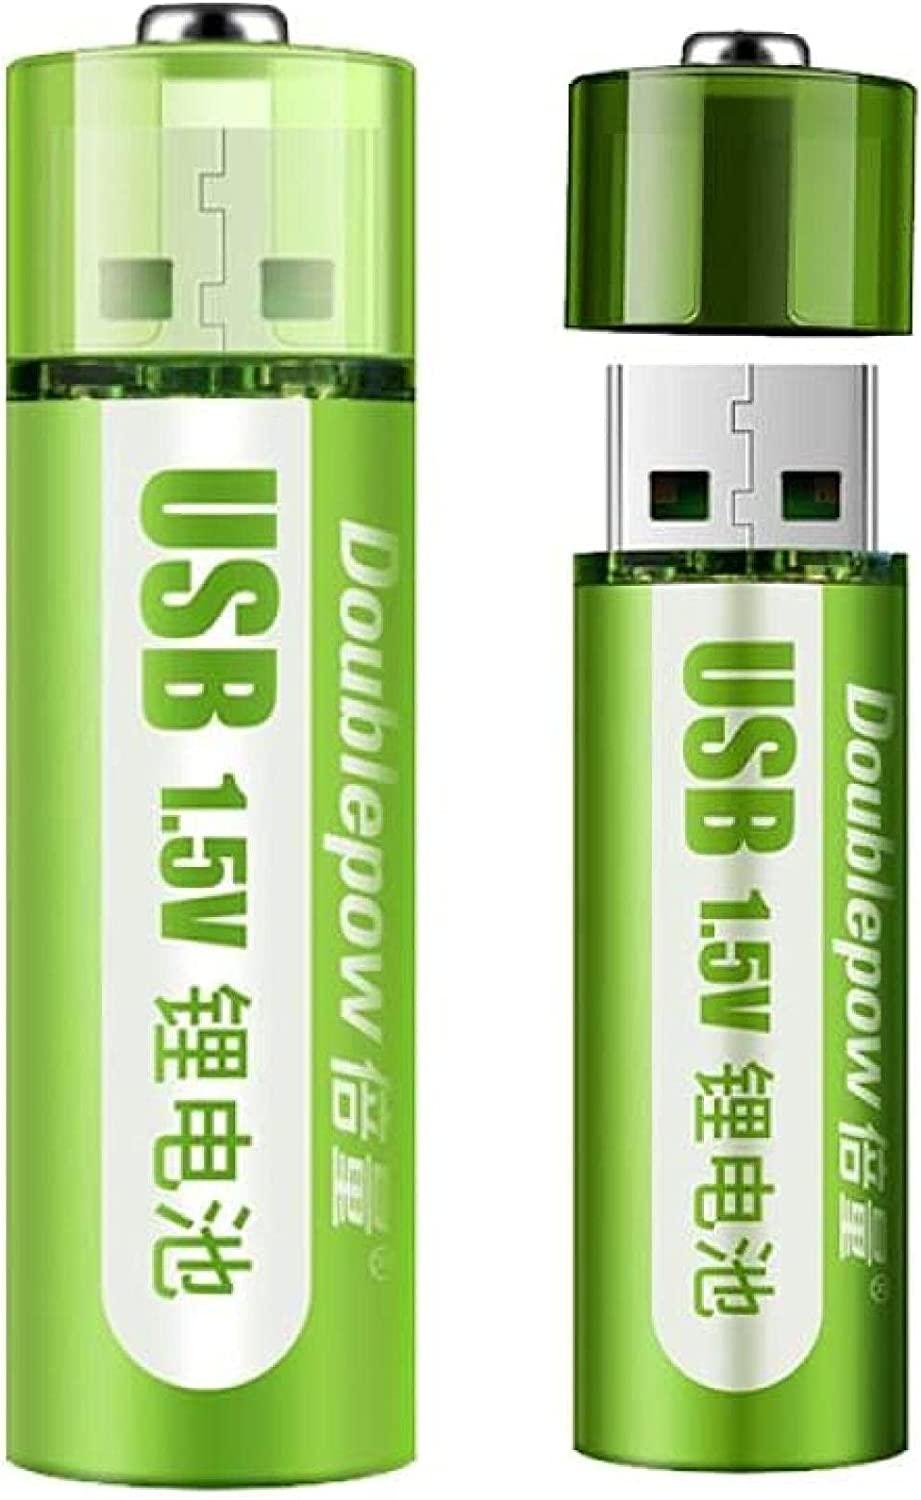 AA Battery 1800mWh USB Rechargeable li-ion Battery 1.5v [2 Pack] - The Remote Factory